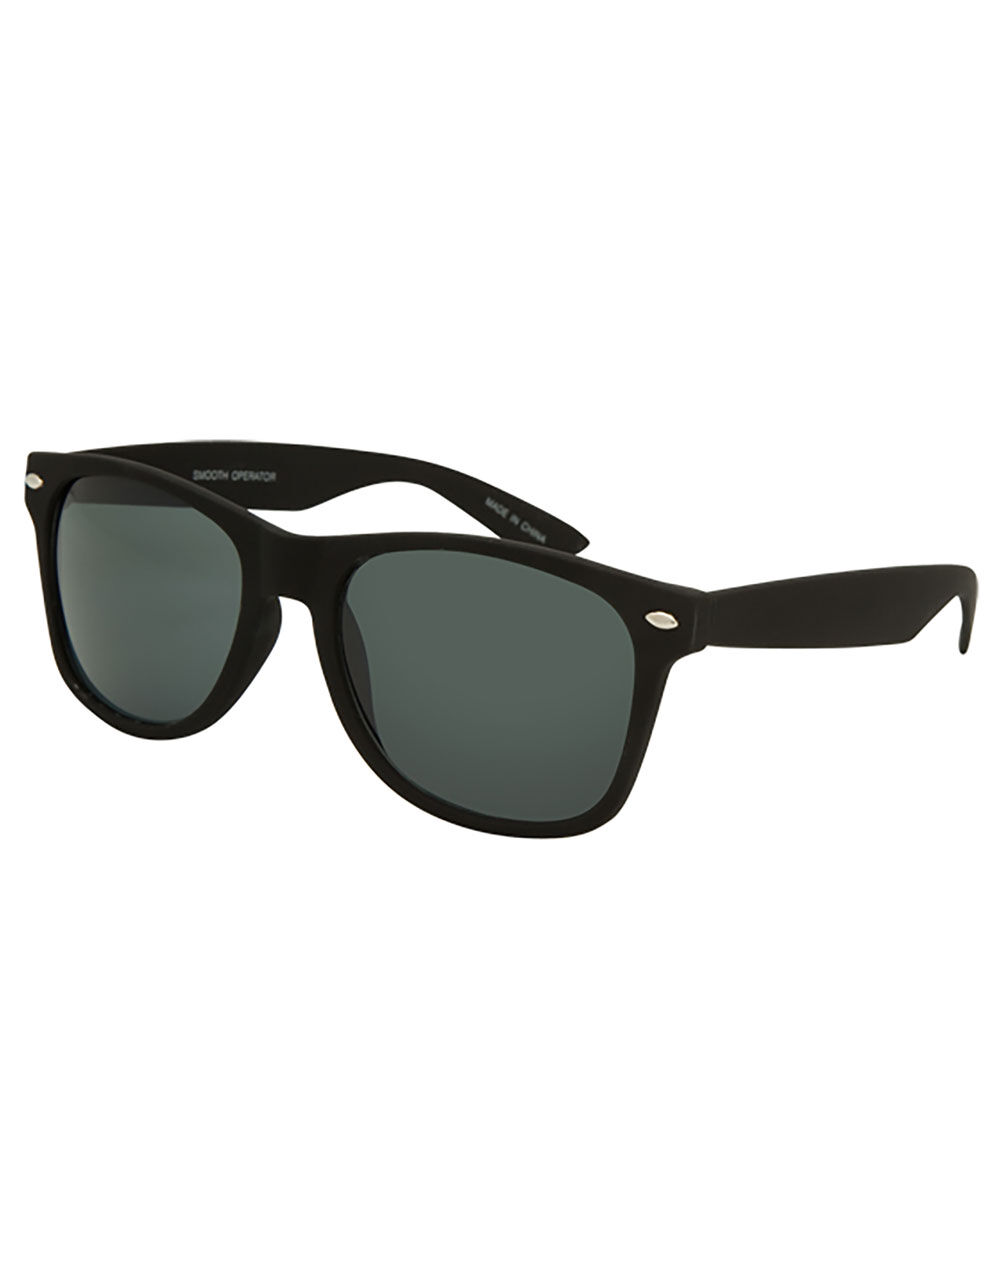 BLUE CROWN Smooth Operator Sunglasses